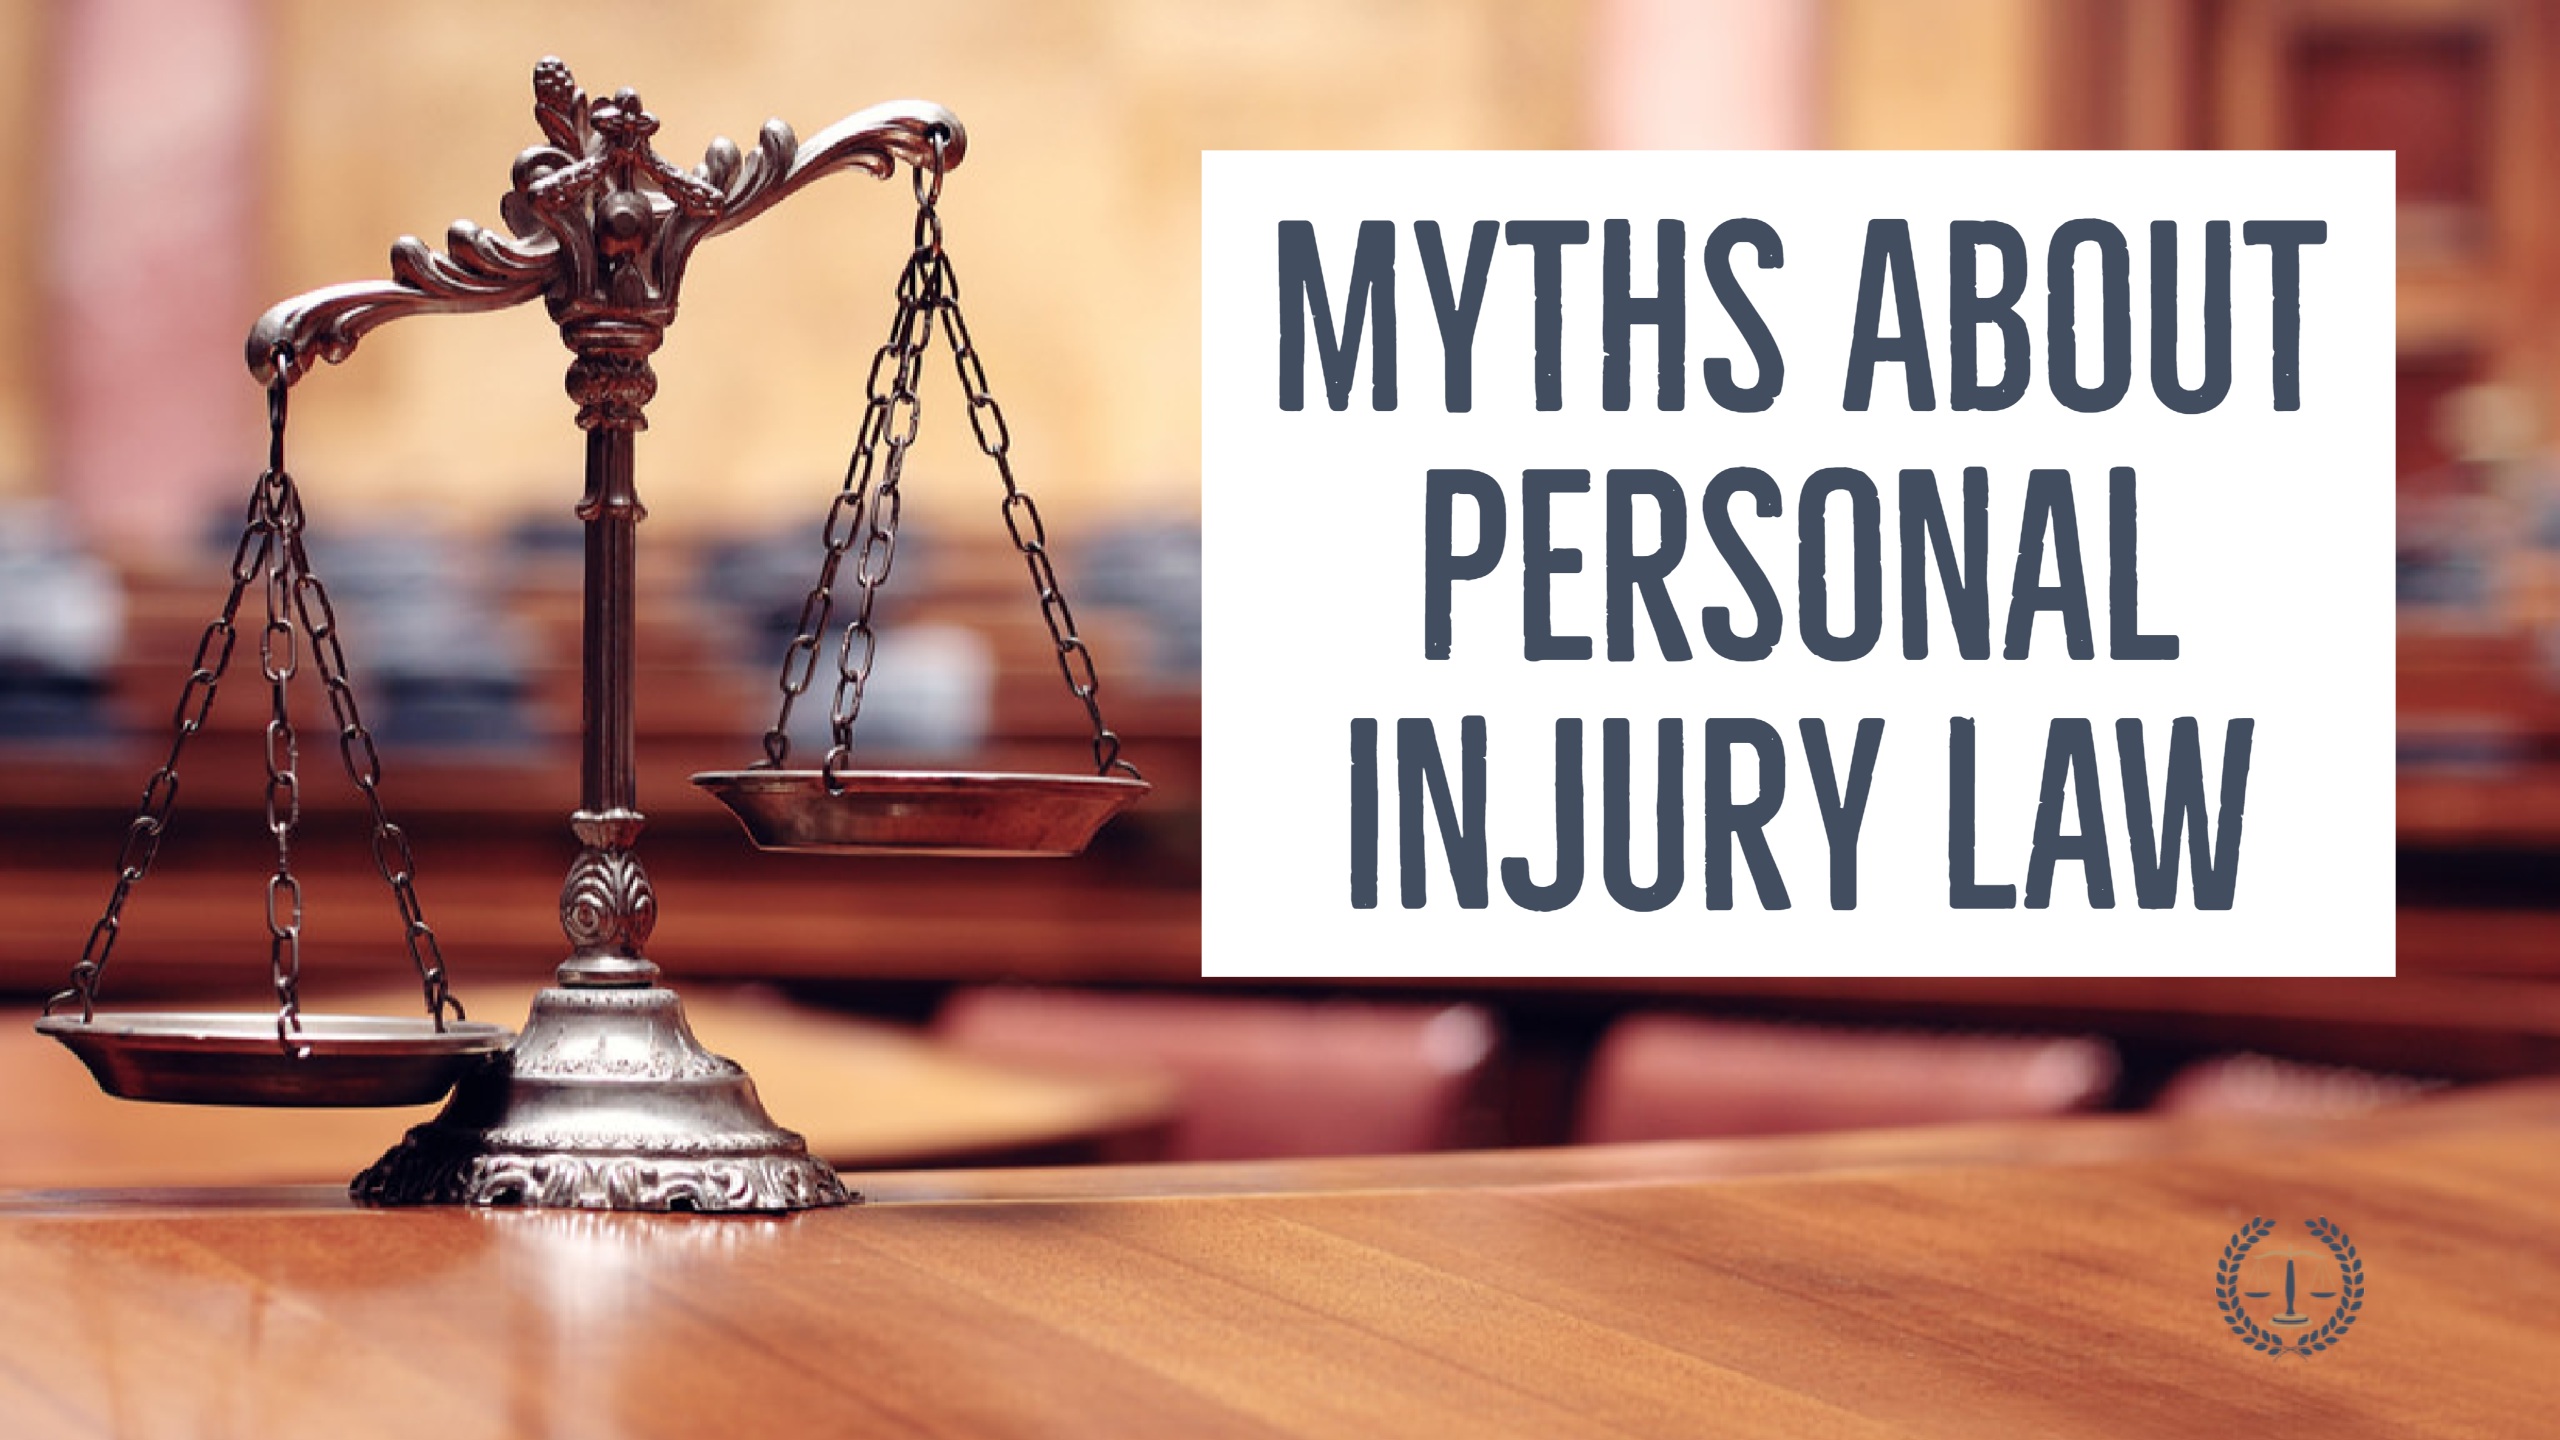 Myths About Personal Injury Law